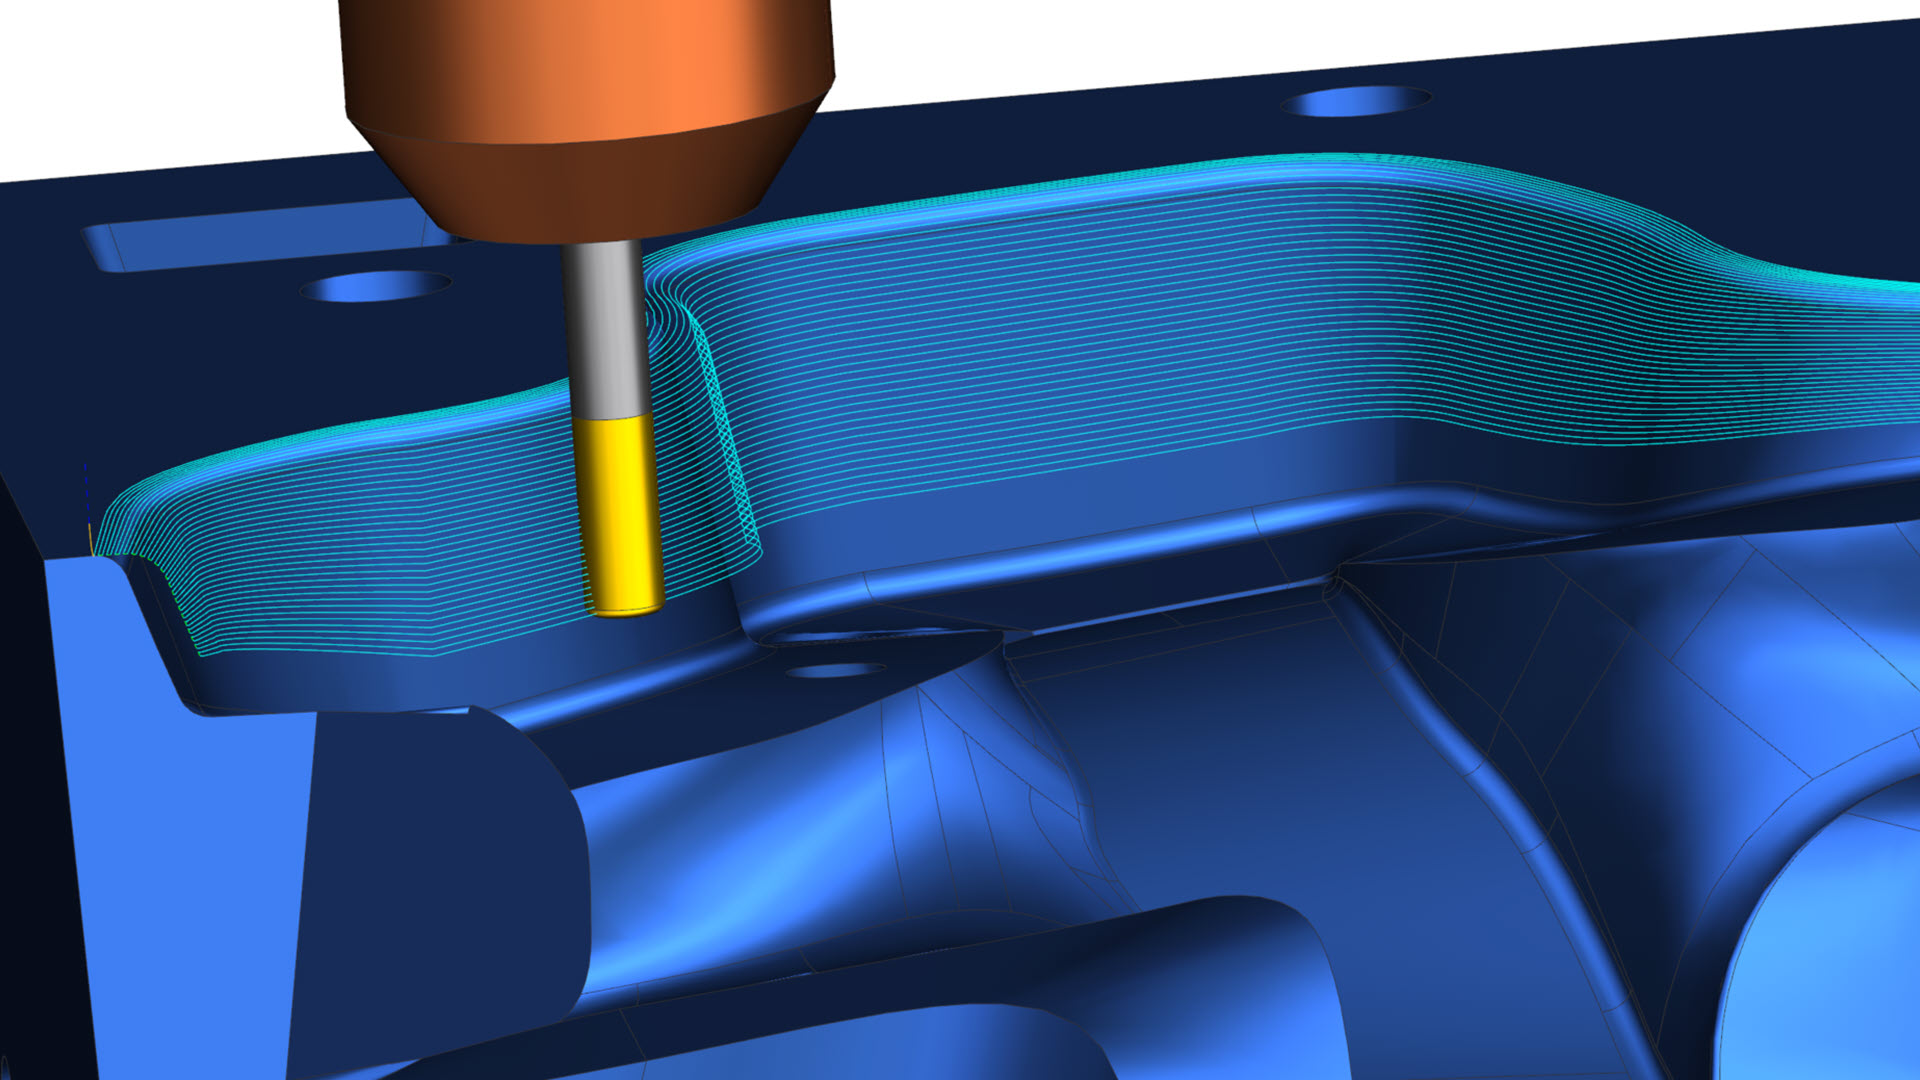 The 3-axis Guiding Curves finishing operations now supports bull nose tools to improve part quality and minimize benchwork.